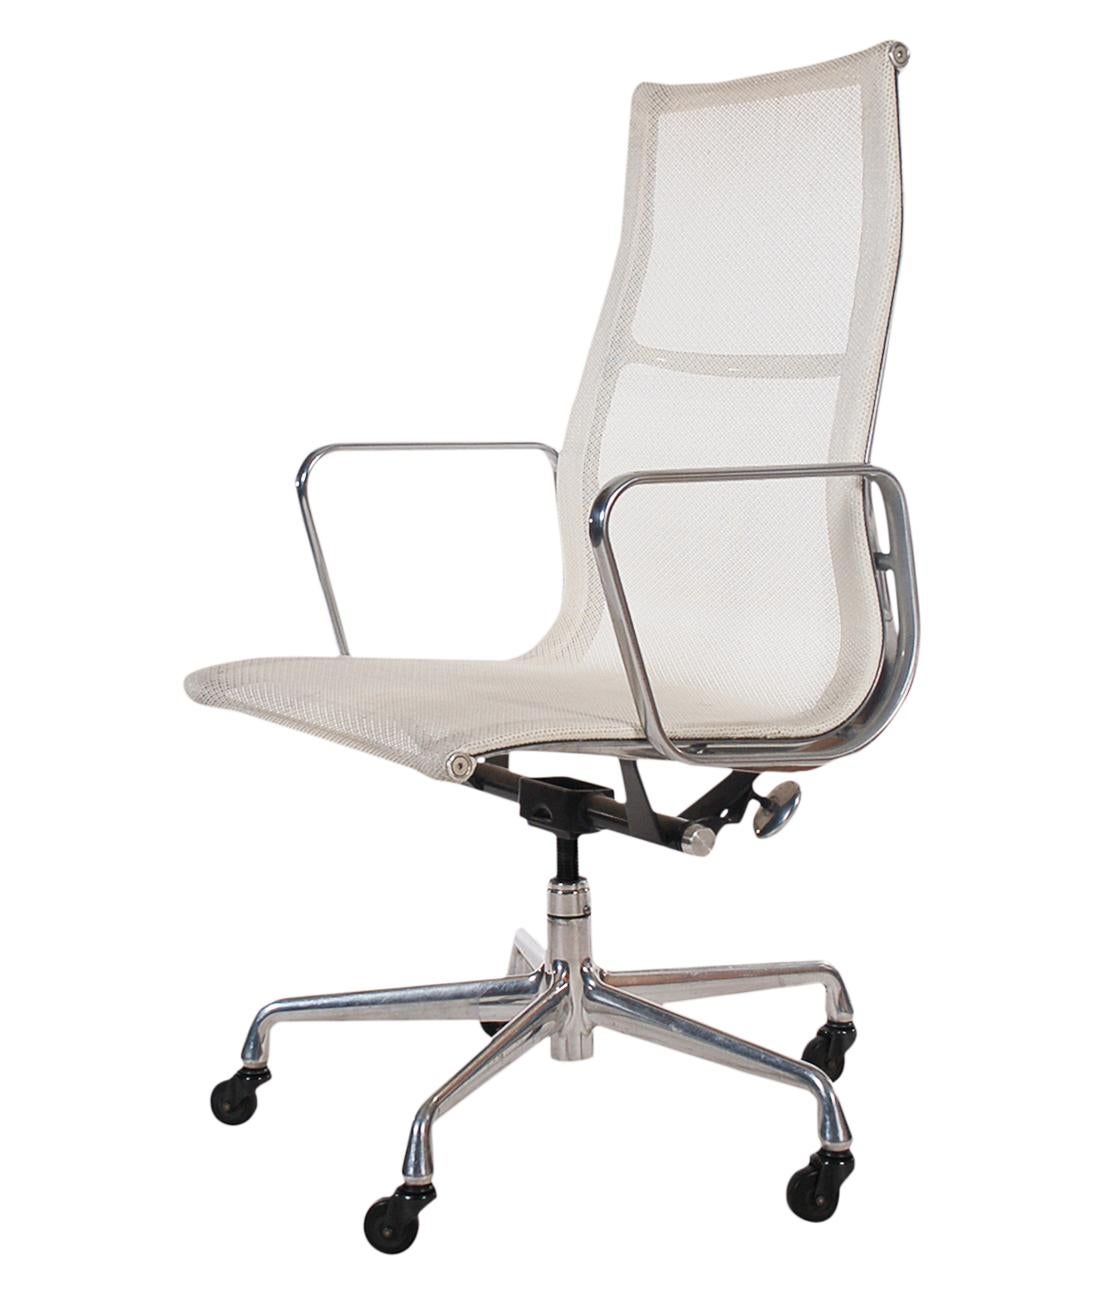 Late 20th Century Set of Four Charles Eames for Herman Miller White Conference Room Office Chairs